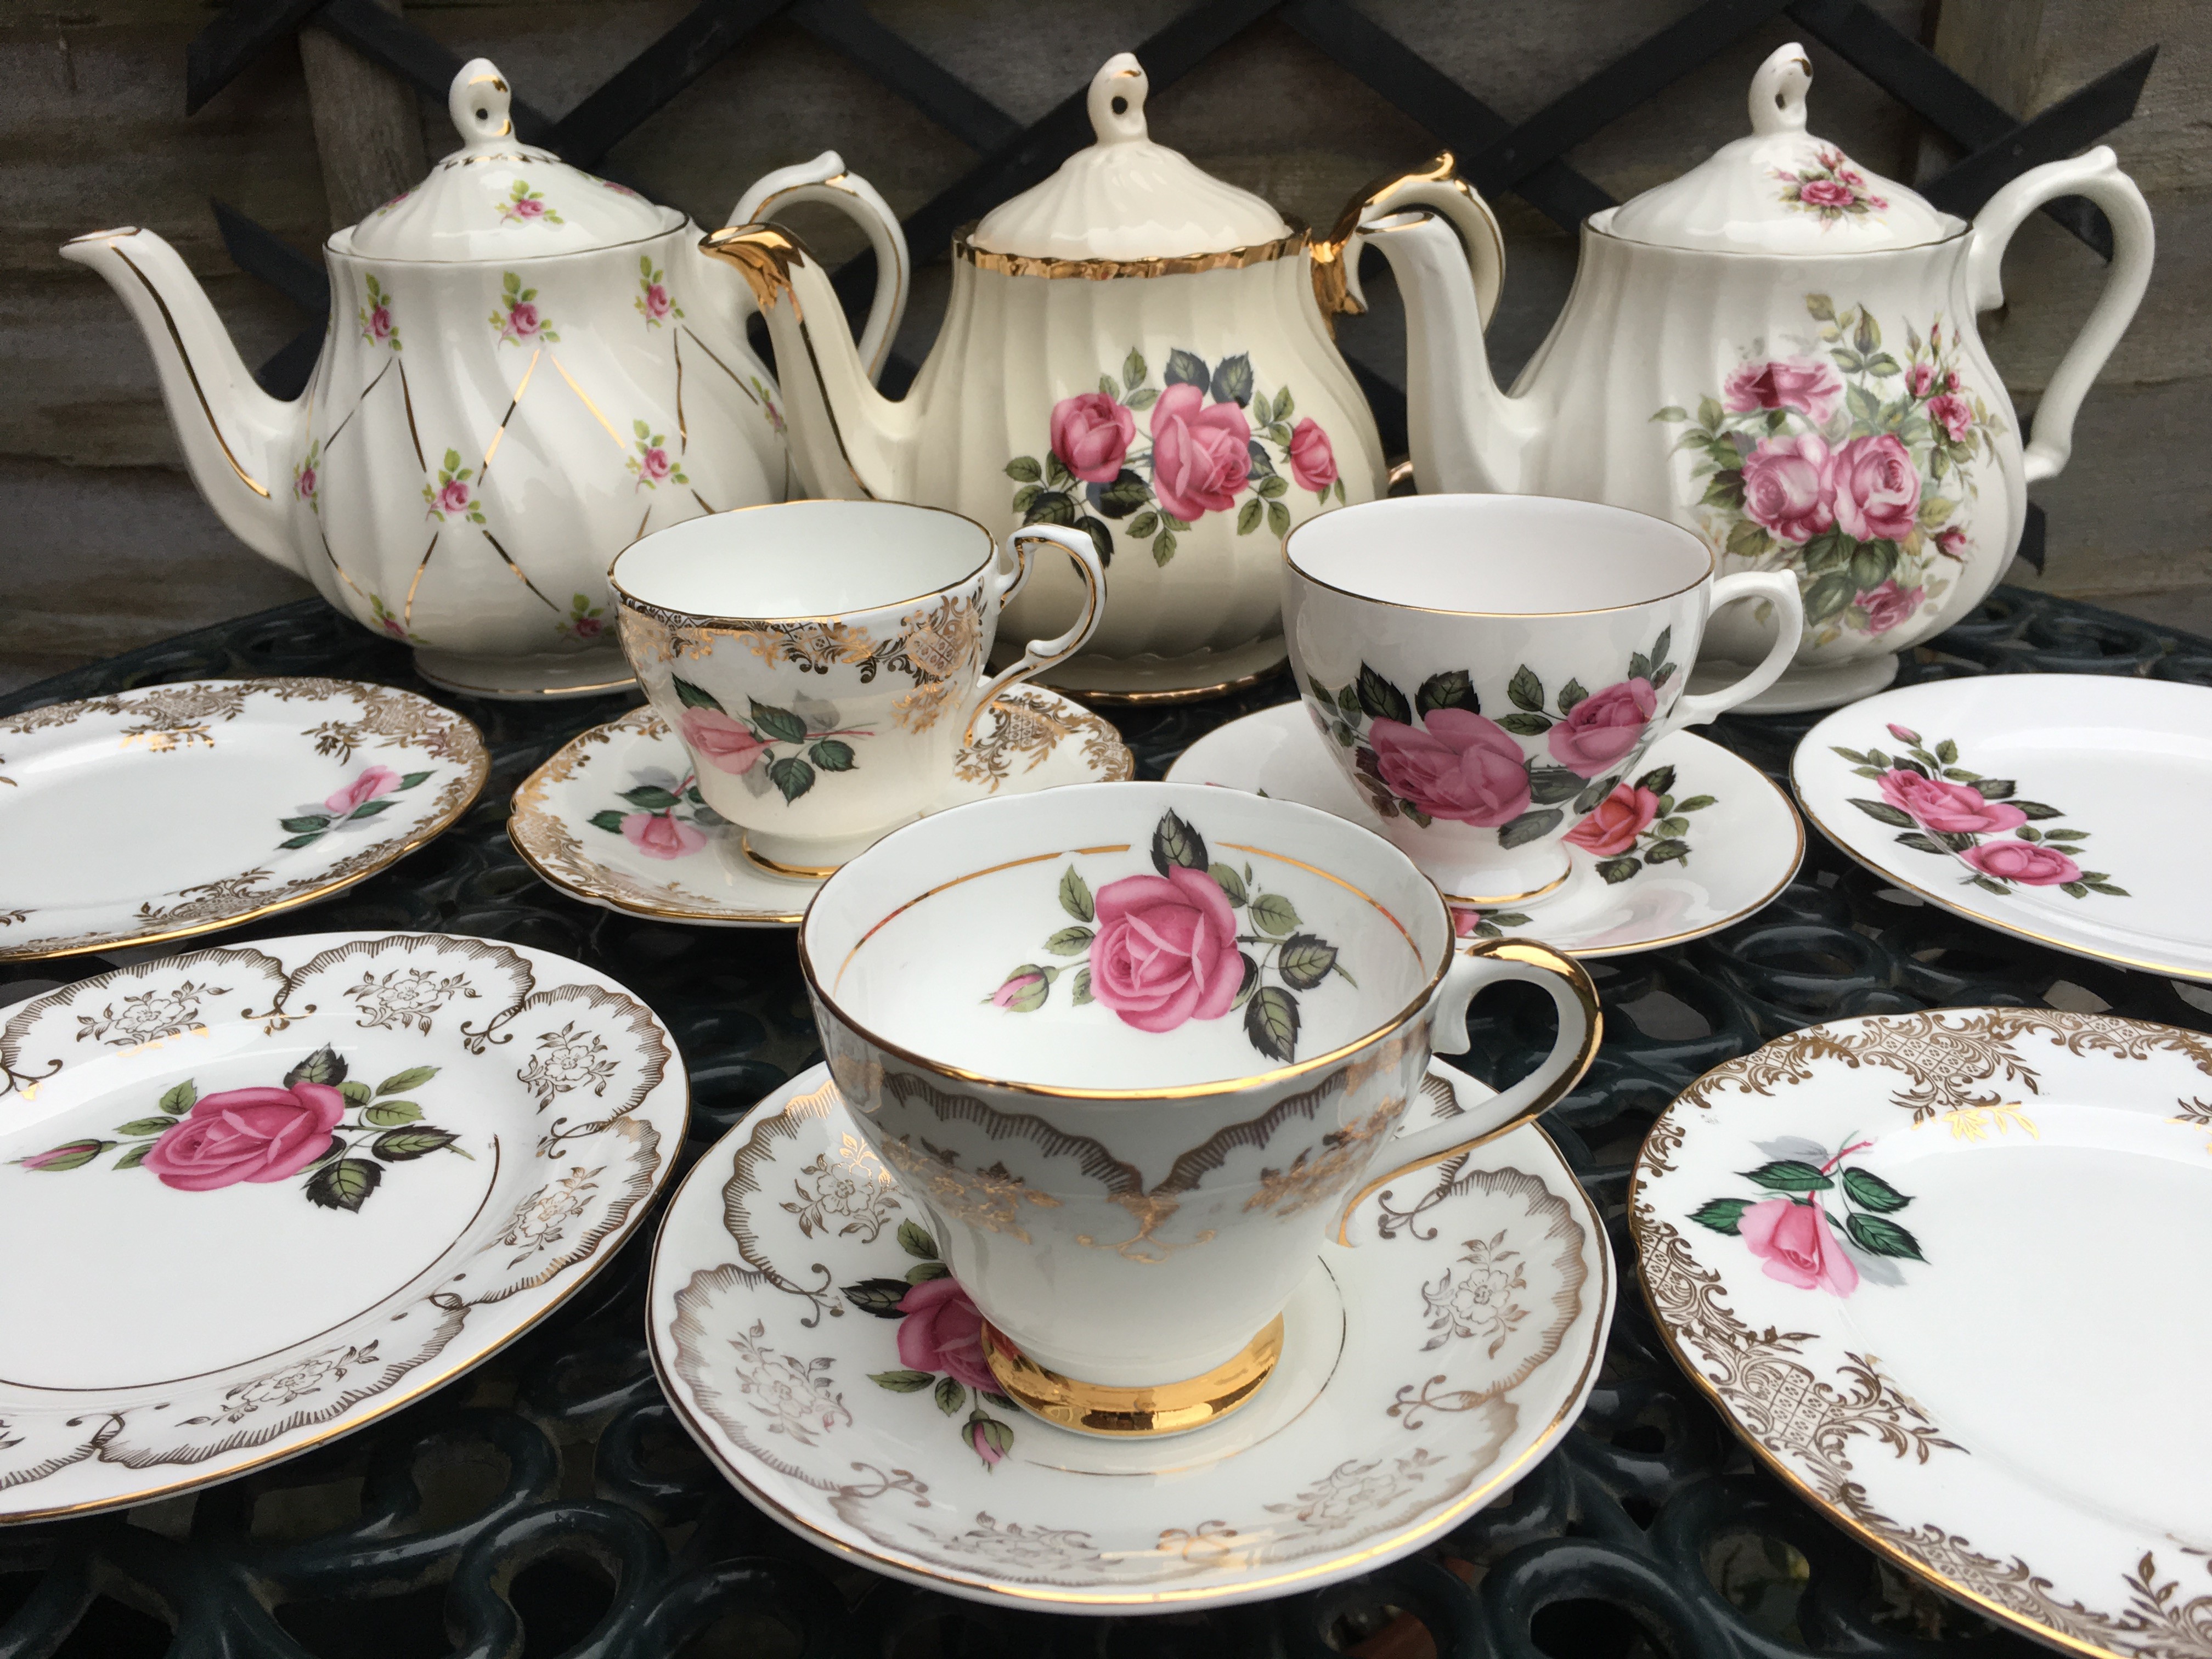 Mismatched vintage china - For hire Brentwood Essex